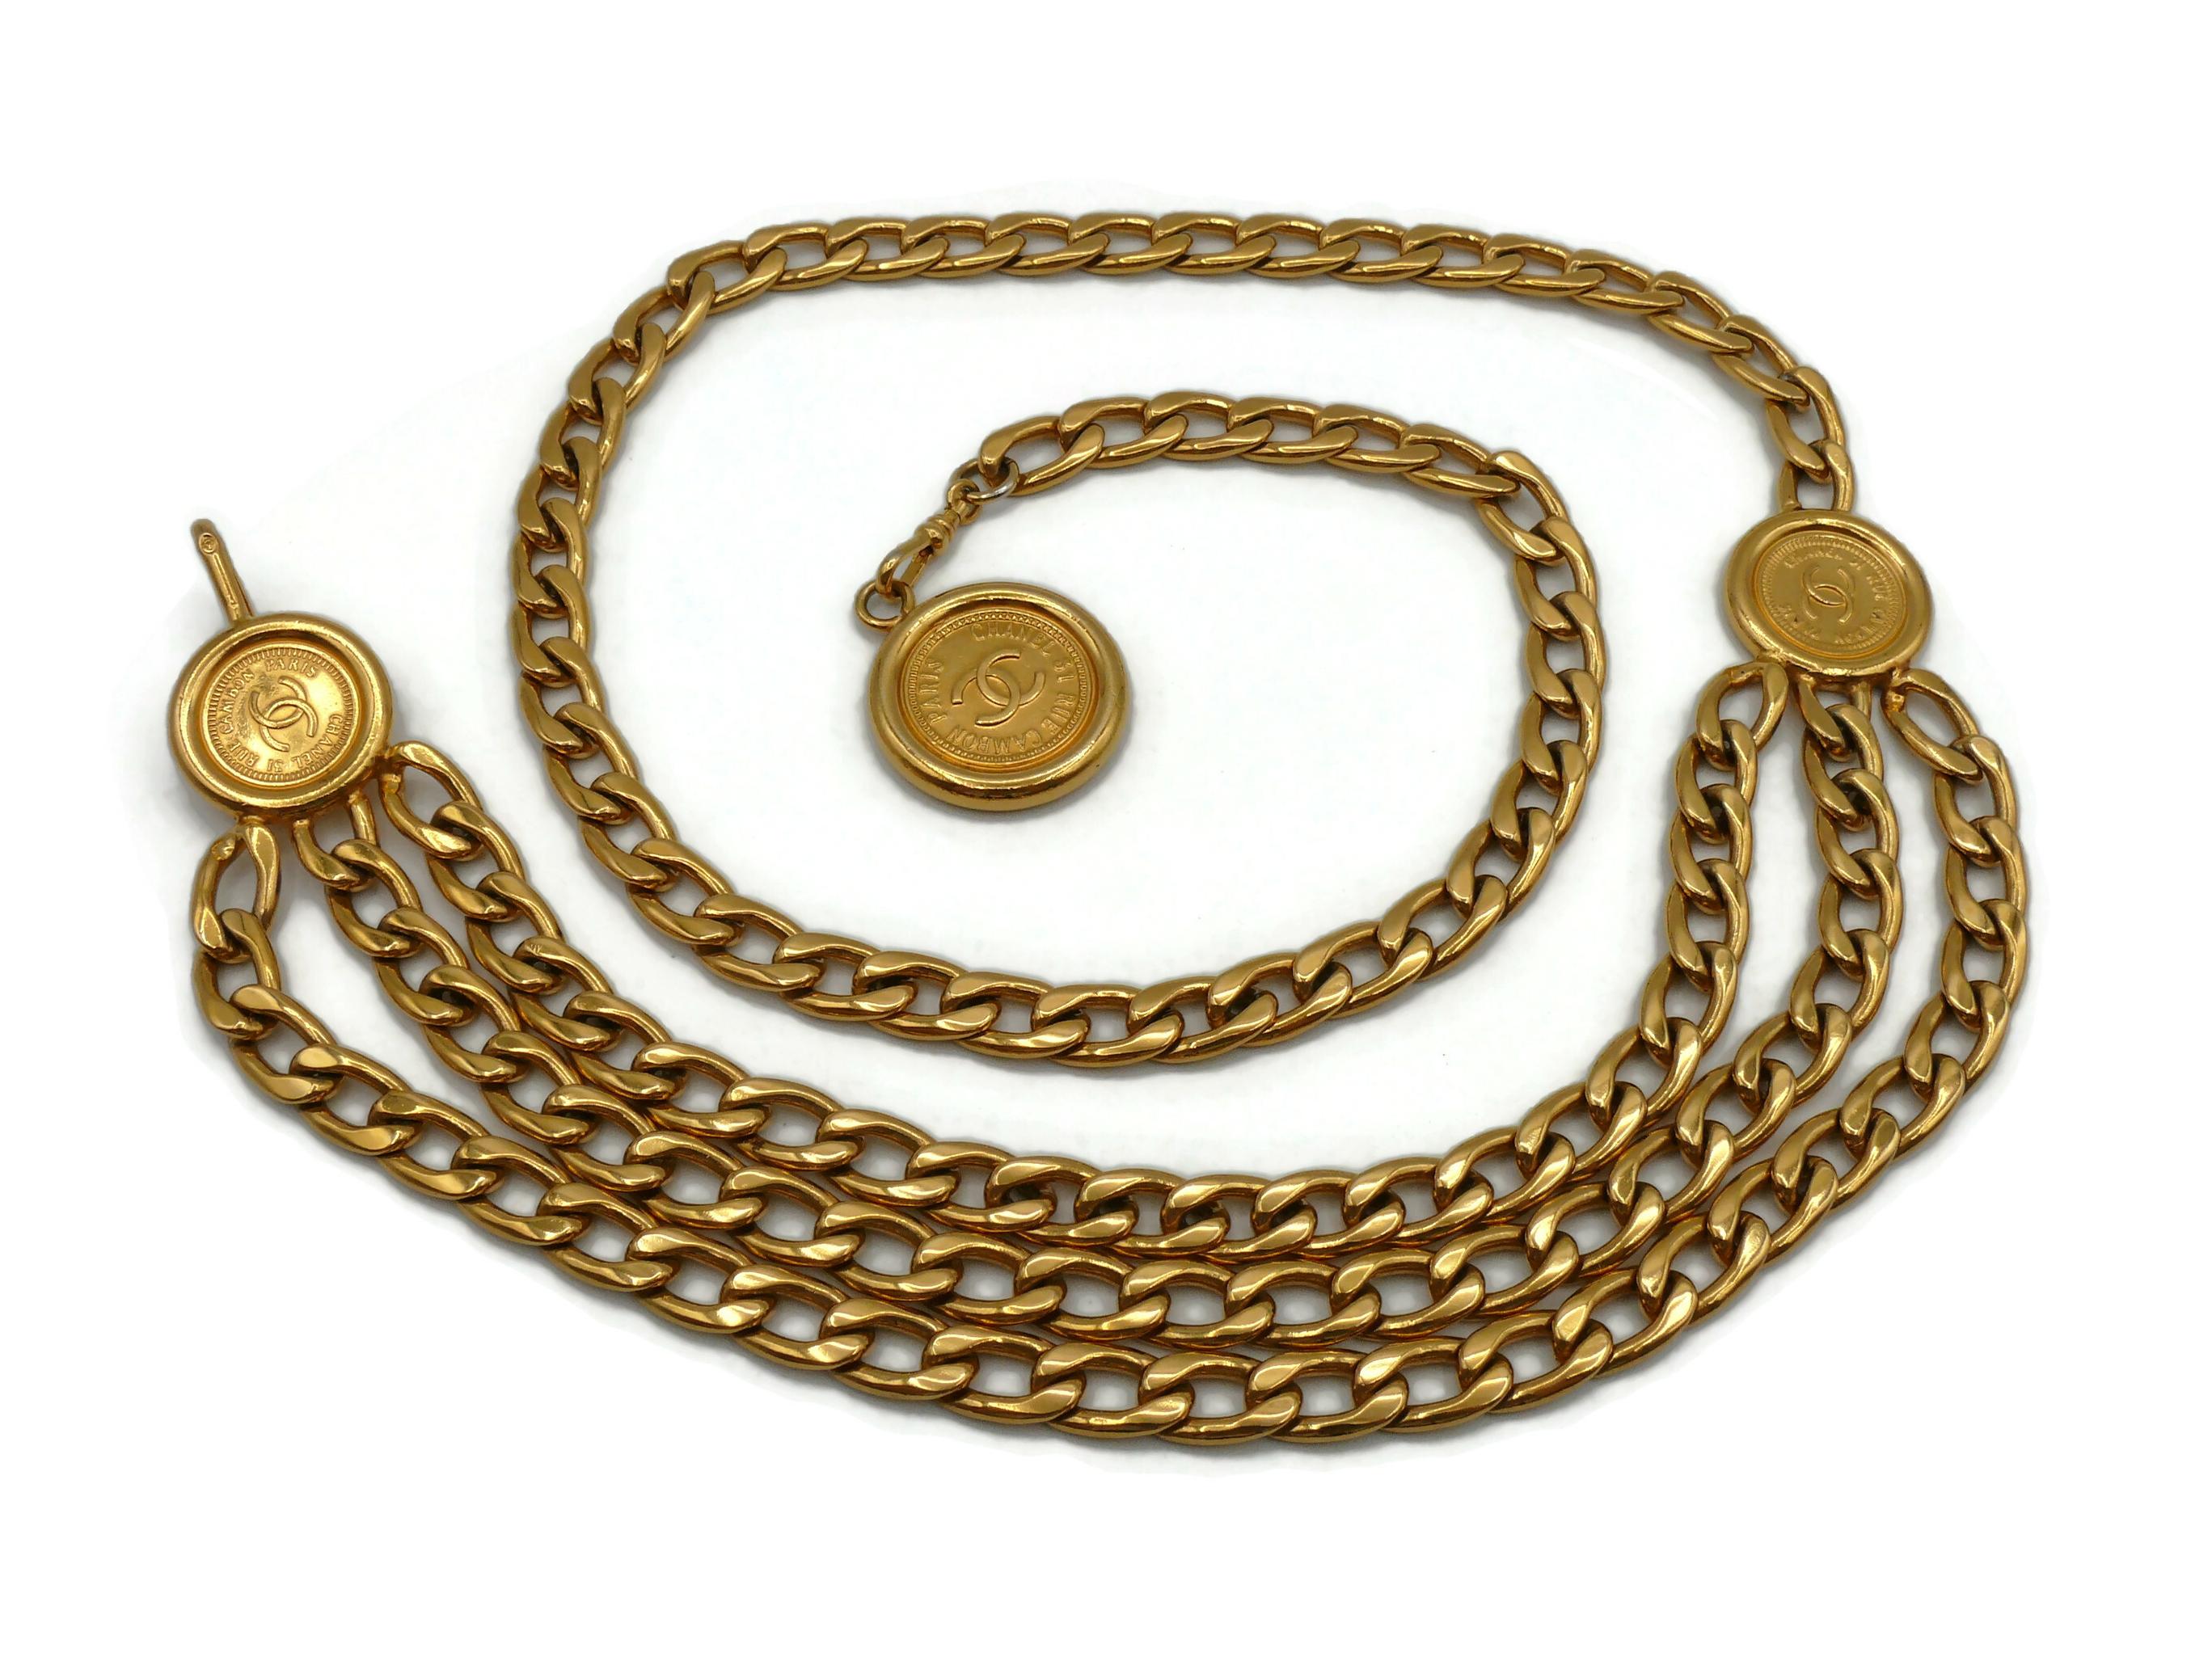 CHANEL Vintage Iconic Gold Tone Chain Belt with 31 Rue Cambon Paris Coins 9